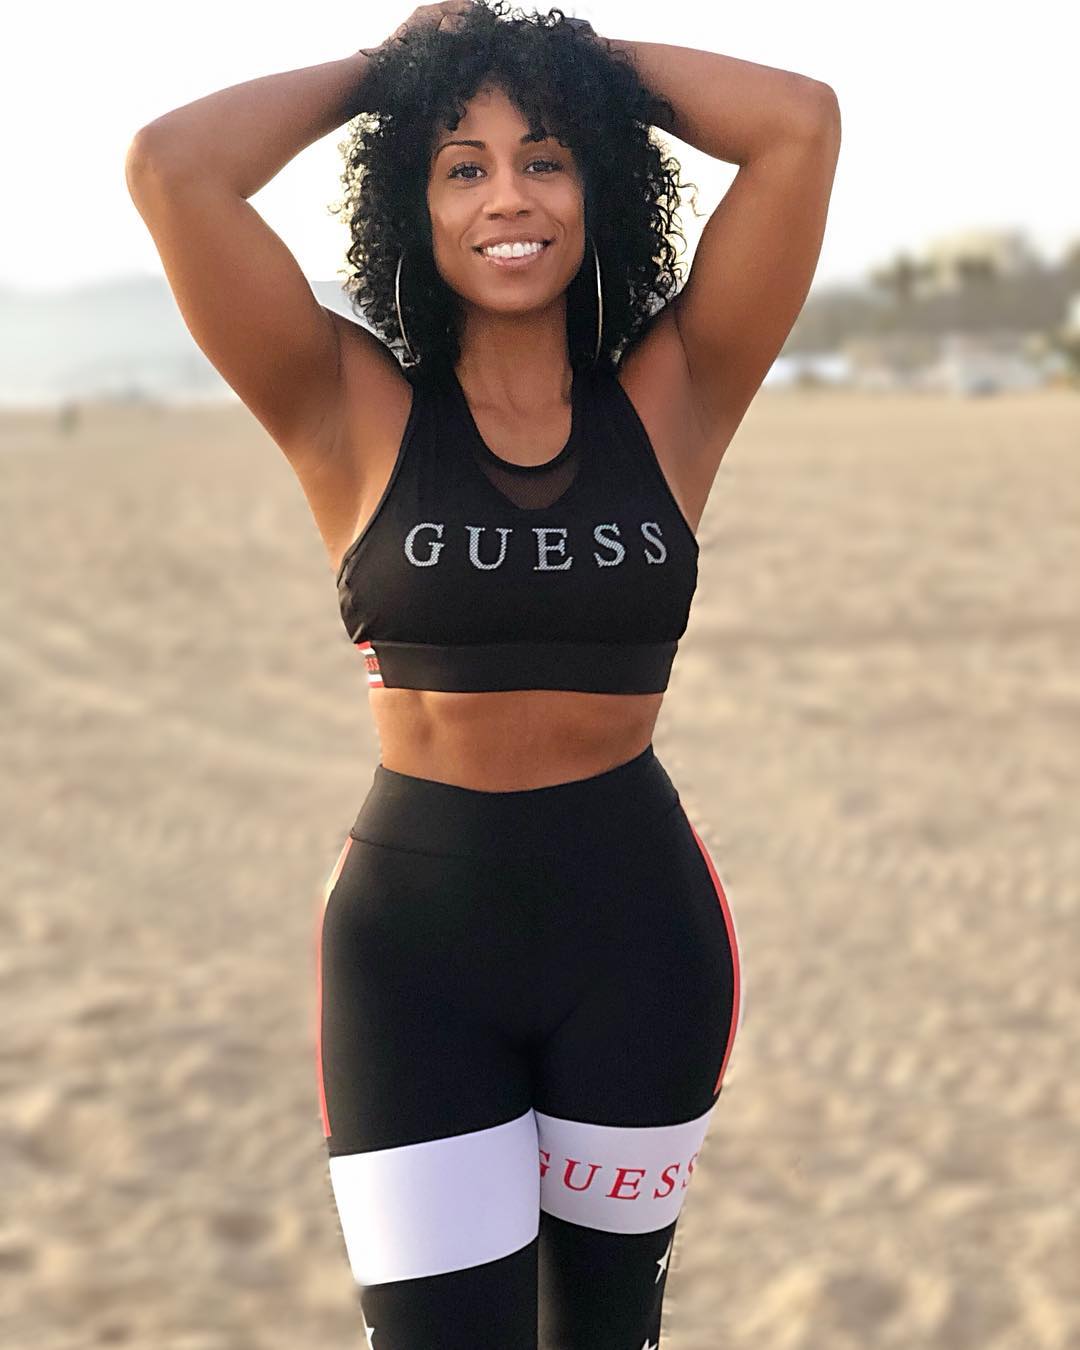 GUESS on X: Boss babe 💪🔥 @LouLouGonzalez in the @guess x